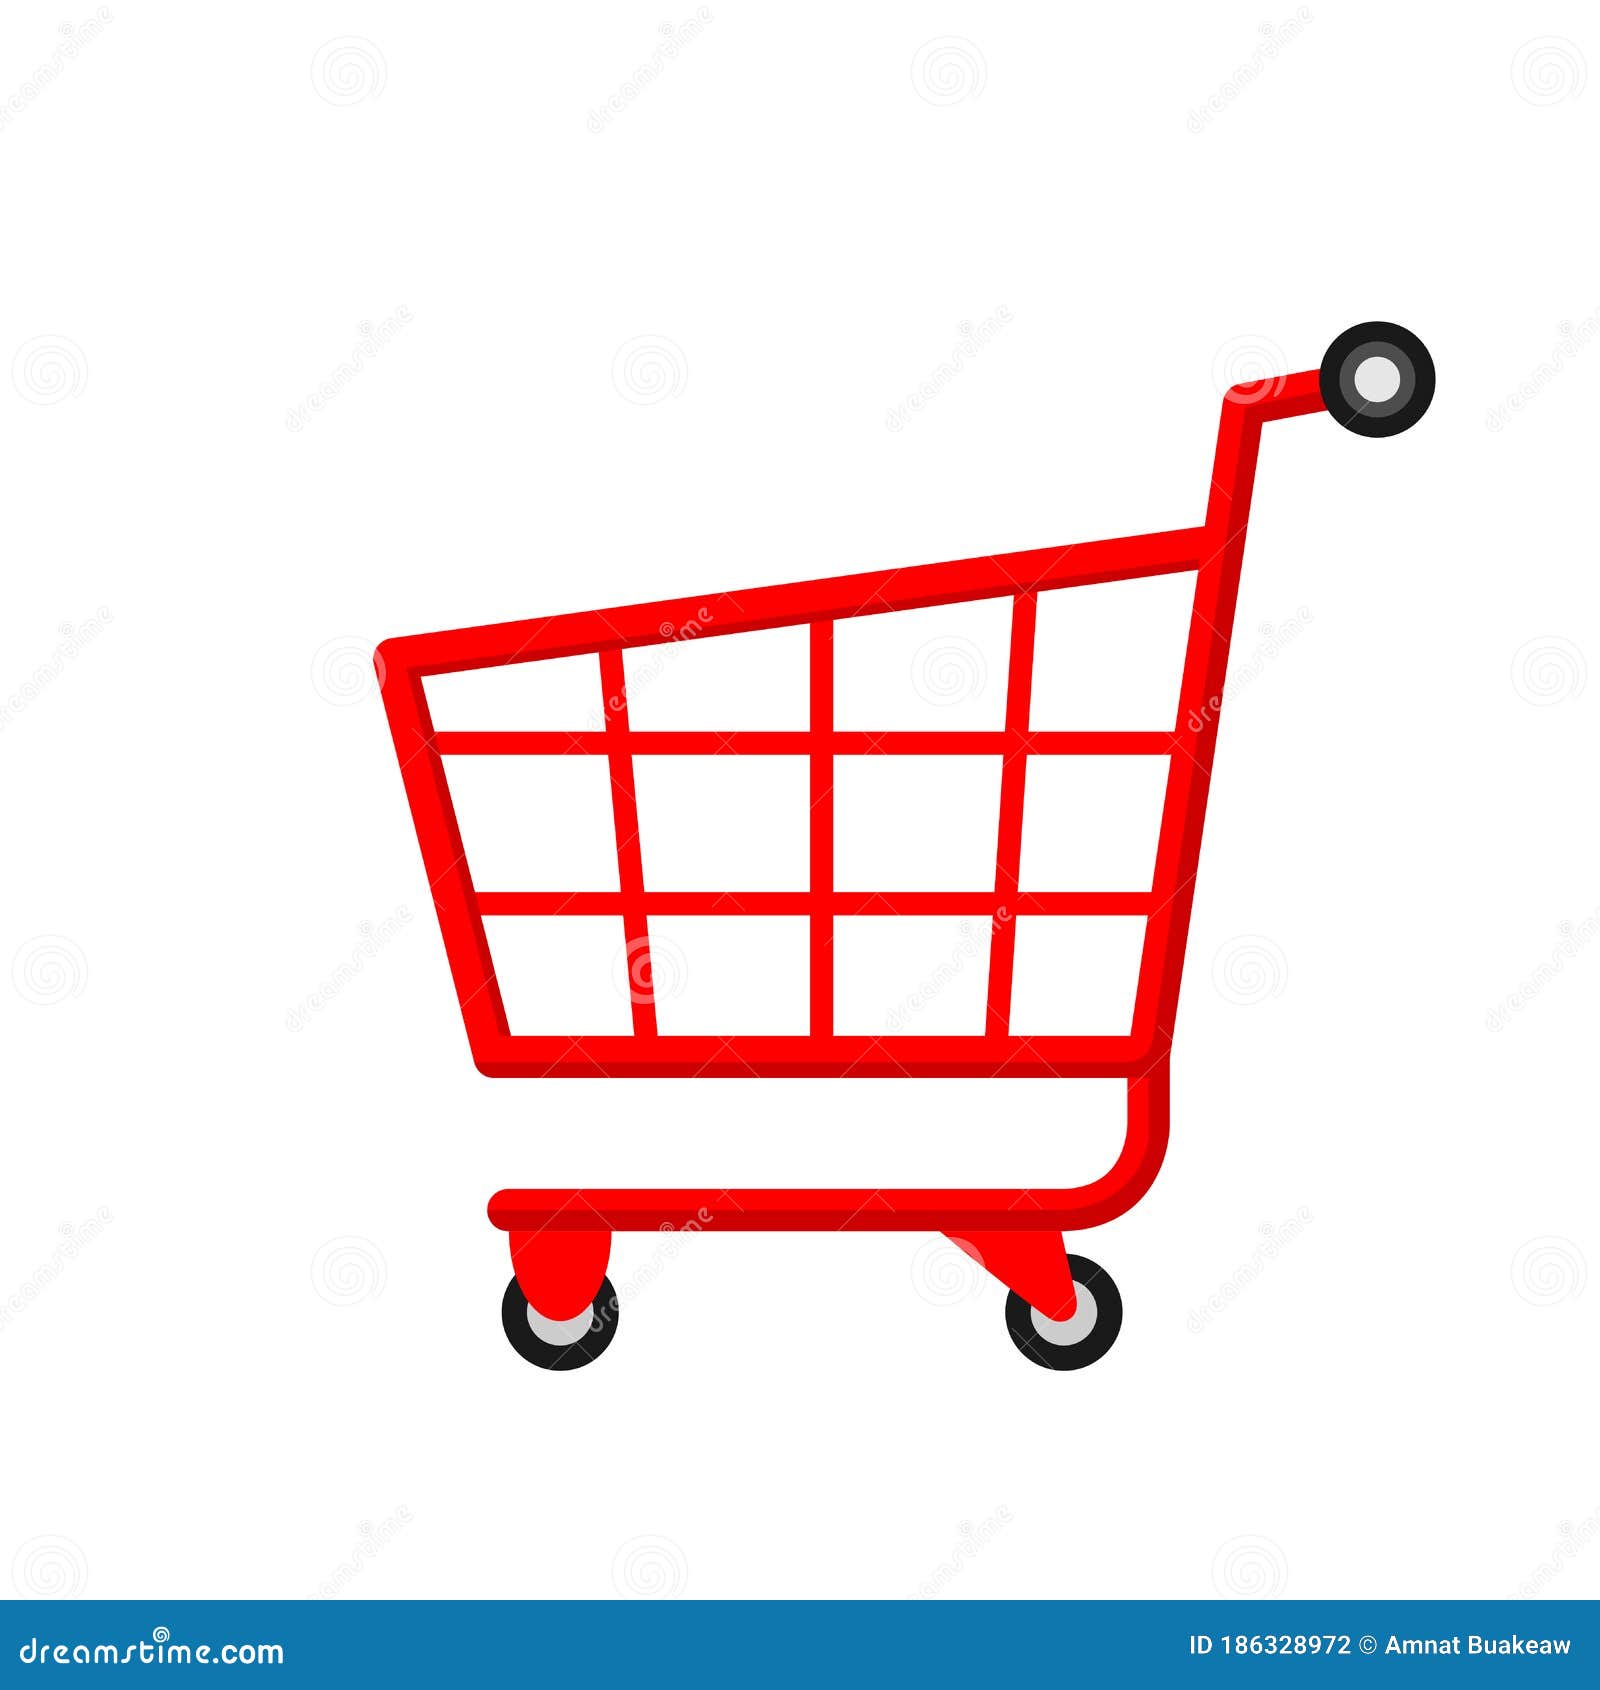 Red Cart for Icon Shopping Online Isolated on White, Basket Cart for Purchase in Online Shop, Trolley Cart Symbol for E-commerce, Stock Vector